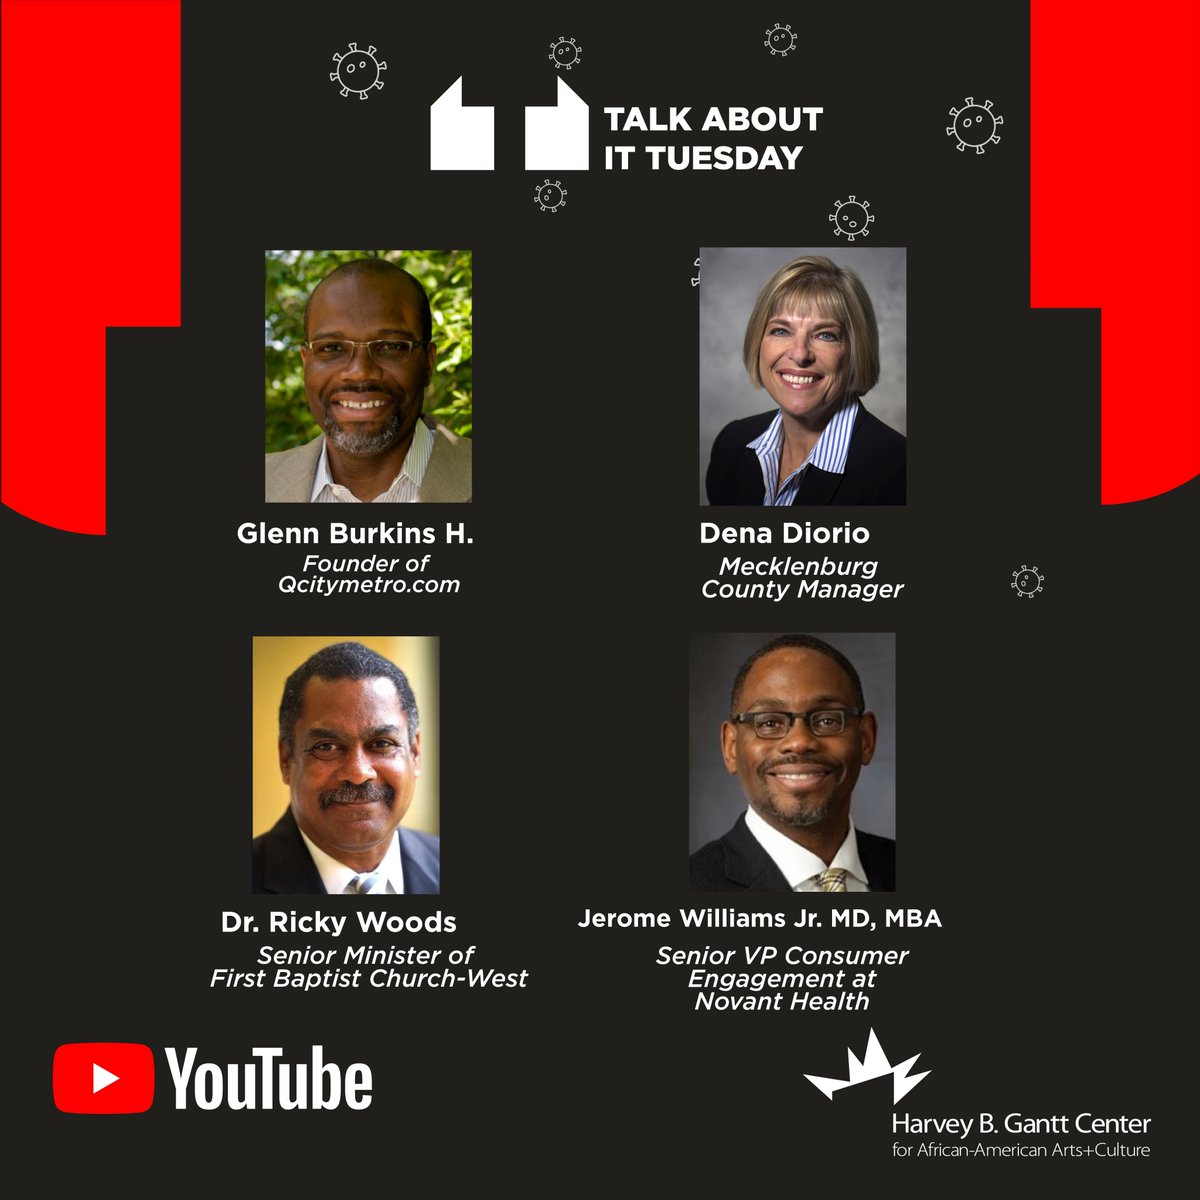 Unmasked: How the Virus Impacts the Black Community - Join us April 14 at 7 PM as we dissect the historical, structural, and social reasons Black communities are a vulnerable population during this pandemic.  https://www.eventbrite.com/e/unmasked-how-the-virus-impacts-the-black-community-tickets-102383894986  #GanttCenter  #CLT  #BlackCommunity